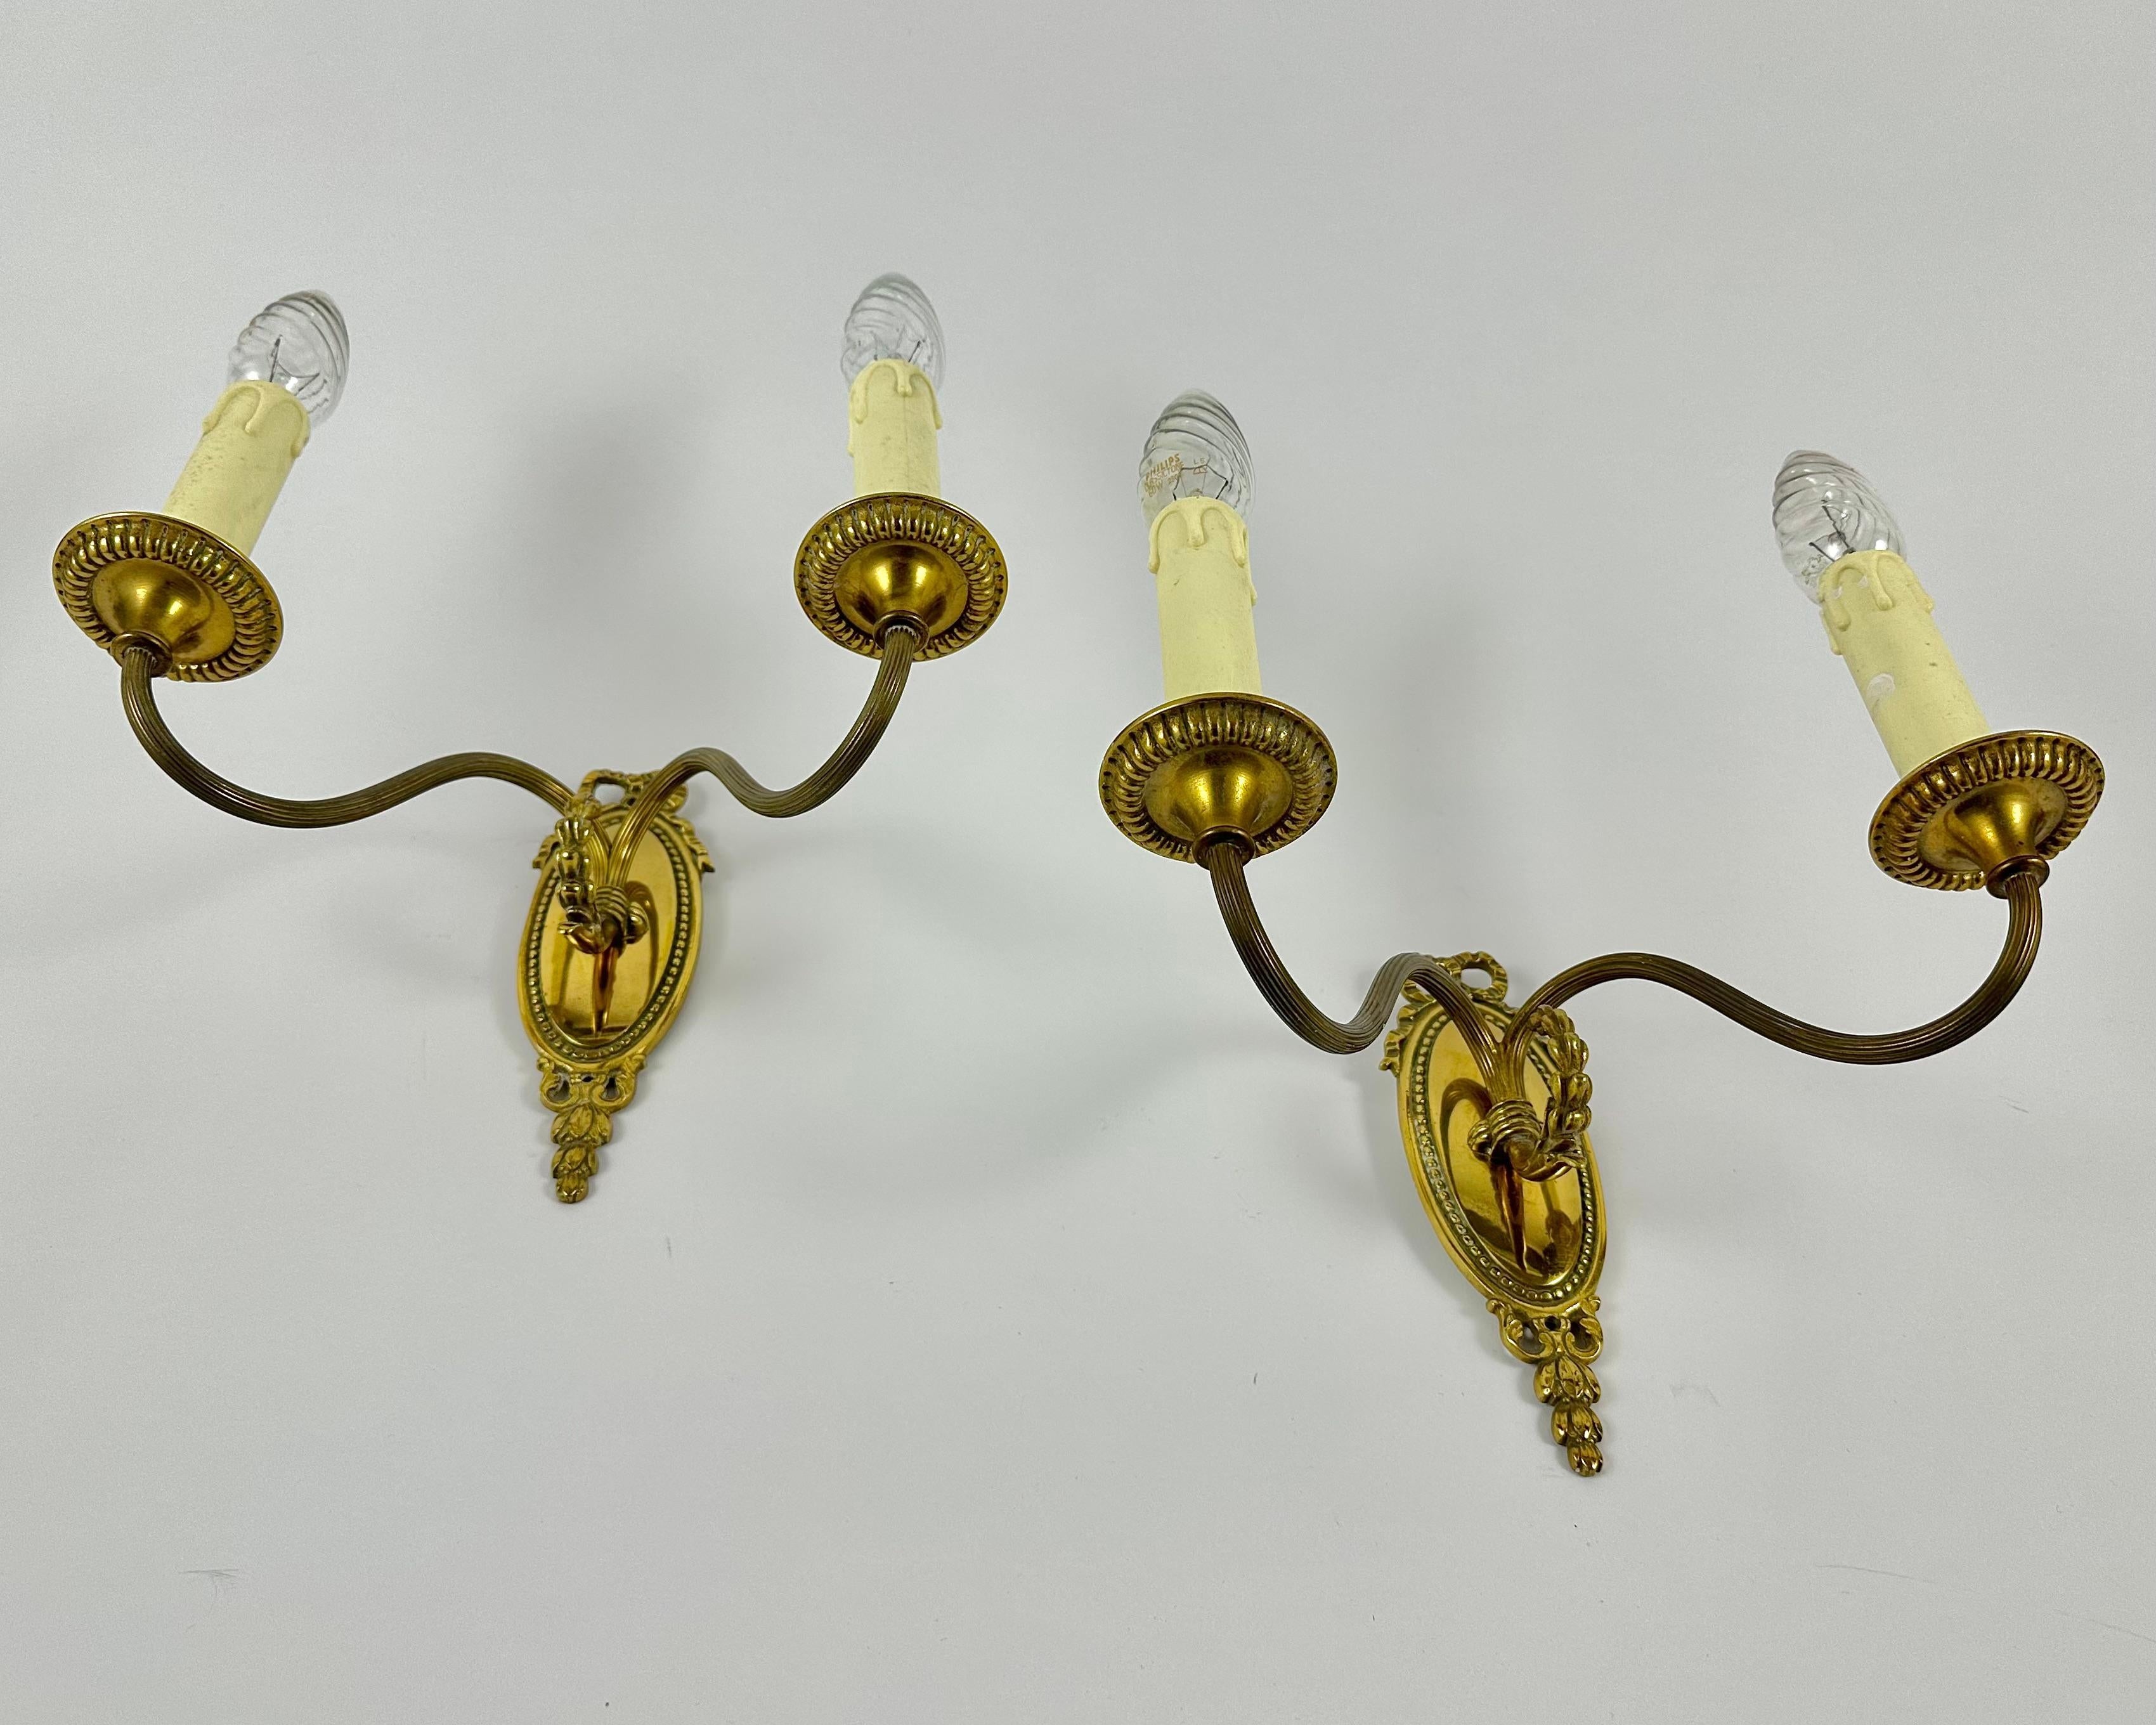 Pair of Belgian Neoclassical or Louis XVI style bronze twin arm sconces from 1970s.

This pair of vintage bronze sconces has a beautiful oval bronze base that has delicate acanthus leaf pattern and a bow.  

Very noble and sensual! Such wall lamps